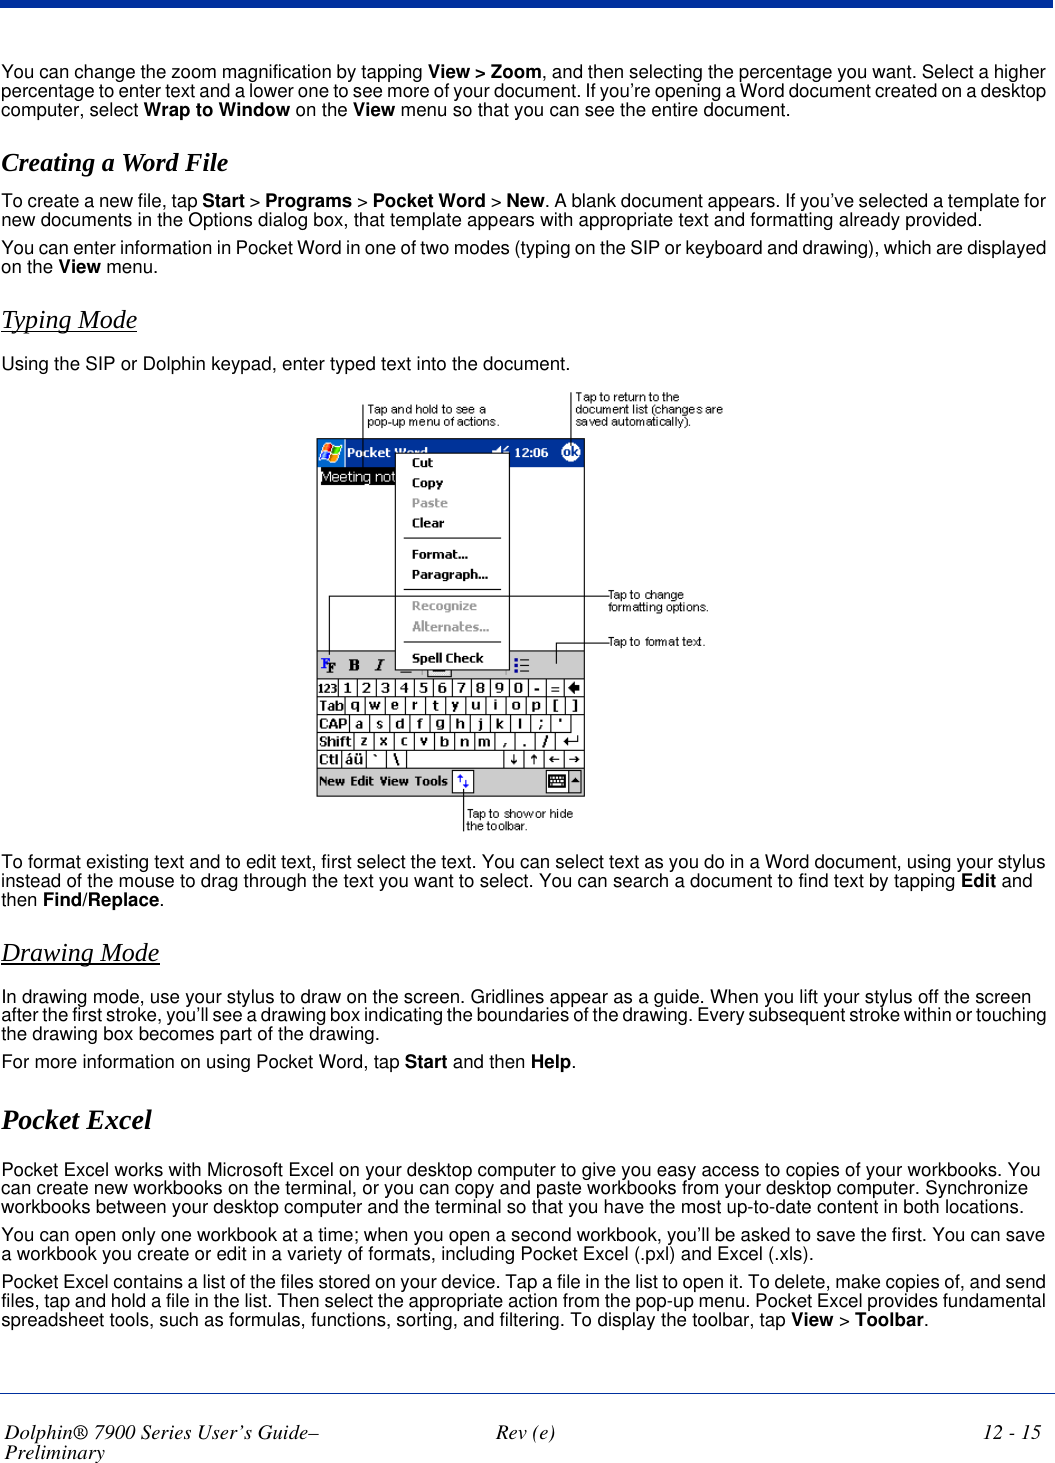 Dolphin® 7900 Series User’s Guide–Preliminary  Rev (e) 12 - 15You can change the zoom magnification by tapping View &gt; Zoom, and then selecting the percentage you want. Select a higher percentage to enter text and a lower one to see more of your document. If you’re opening a Word document created on a desktop computer, select Wrap to Window on the View menu so that you can see the entire document.Creating a Word FileTo create a new file, tap Start &gt; Programs &gt; Pocket Word &gt; New. A blank document appears. If you’ve selected a template for new documents in the Options dialog box, that template appears with appropriate text and formatting already provided.You can enter information in Pocket Word in one of two modes (typing on the SIP or keyboard and drawing), which are displayed on the View menu. Typing ModeUsing the SIP or Dolphin keypad, enter typed text into the document. To format existing text and to edit text, first select the text. You can select text as you do in a Word document, using your stylus instead of the mouse to drag through the text you want to select. You can search a document to find text by tapping Edit and then Find/Replace.Drawing ModeIn drawing mode, use your stylus to draw on the screen. Gridlines appear as a guide. When you lift your stylus off the screen after the first stroke, you’ll see a drawing box indicating the boundaries of the drawing. Every subsequent stroke within or touching the drawing box becomes part of the drawing. For more information on using Pocket Word, tap Start and then Help.Pocket ExcelPocket Excel works with Microsoft Excel on your desktop computer to give you easy access to copies of your workbooks. You can create new workbooks on the terminal, or you can copy and paste workbooks from your desktop computer. Synchronize workbooks between your desktop computer and the terminal so that you have the most up-to-date content in both locations.You can open only one workbook at a time; when you open a second workbook, you’ll be asked to save the first. You can save a workbook you create or edit in a variety of formats, including Pocket Excel (.pxl) and Excel (.xls).Pocket Excel contains a list of the files stored on your device. Tap a file in the list to open it. To delete, make copies of, and send files, tap and hold a file in the list. Then select the appropriate action from the pop-up menu. Pocket Excel provides fundamental spreadsheet tools, such as formulas, functions, sorting, and filtering. To display the toolbar, tap View &gt; Toolbar.